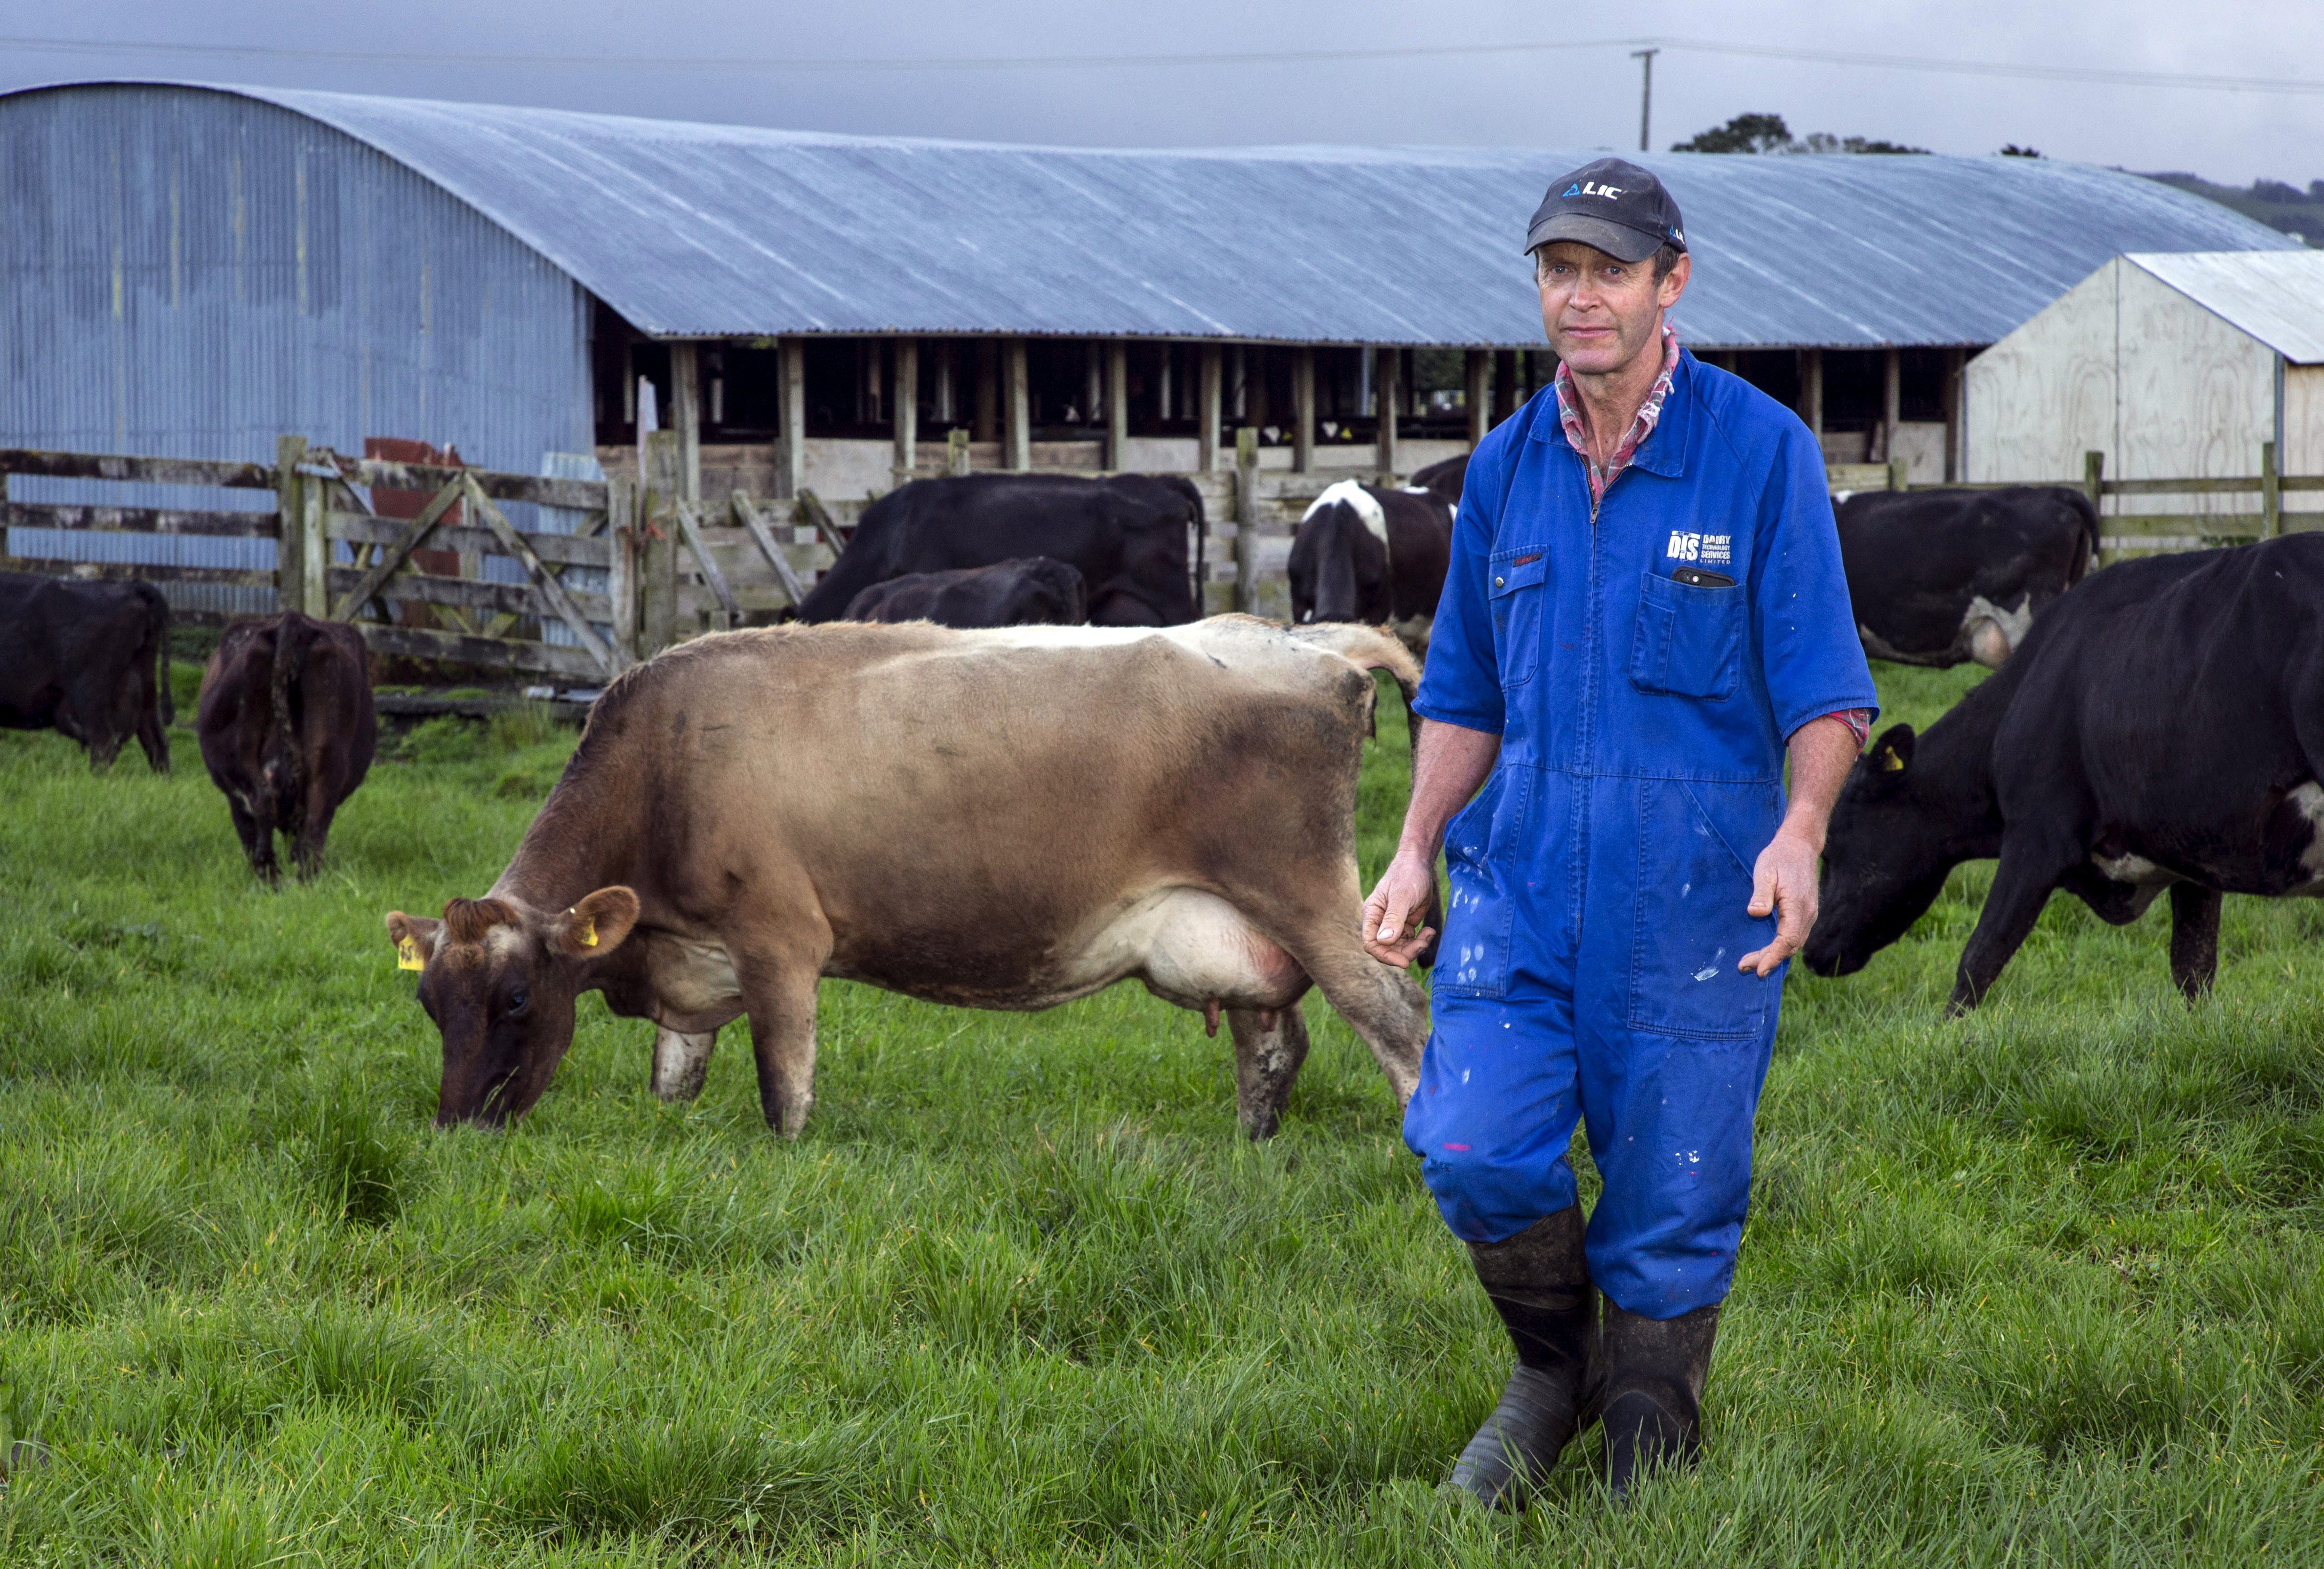 Dairy farmer Keith Trotter stands in a field near milking sheds amongst his herd of cows on his farm in the town of Matakana, located north of Auckland, New Zealand